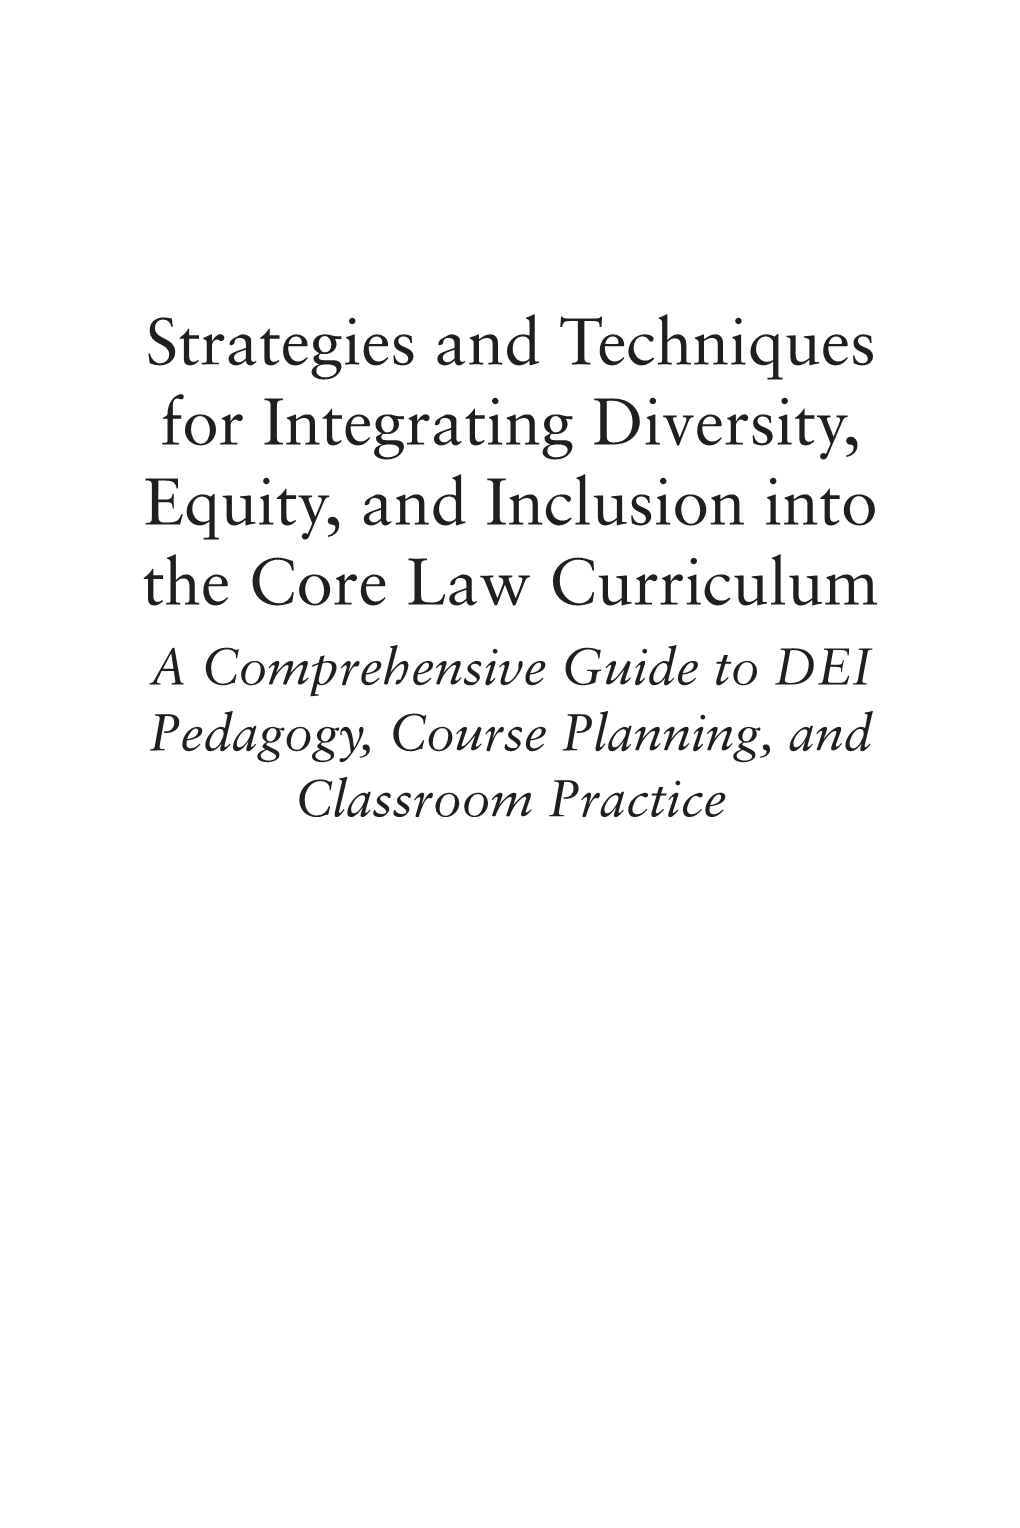 Strategies and Techniques for Integrating Diversity, Equity, And